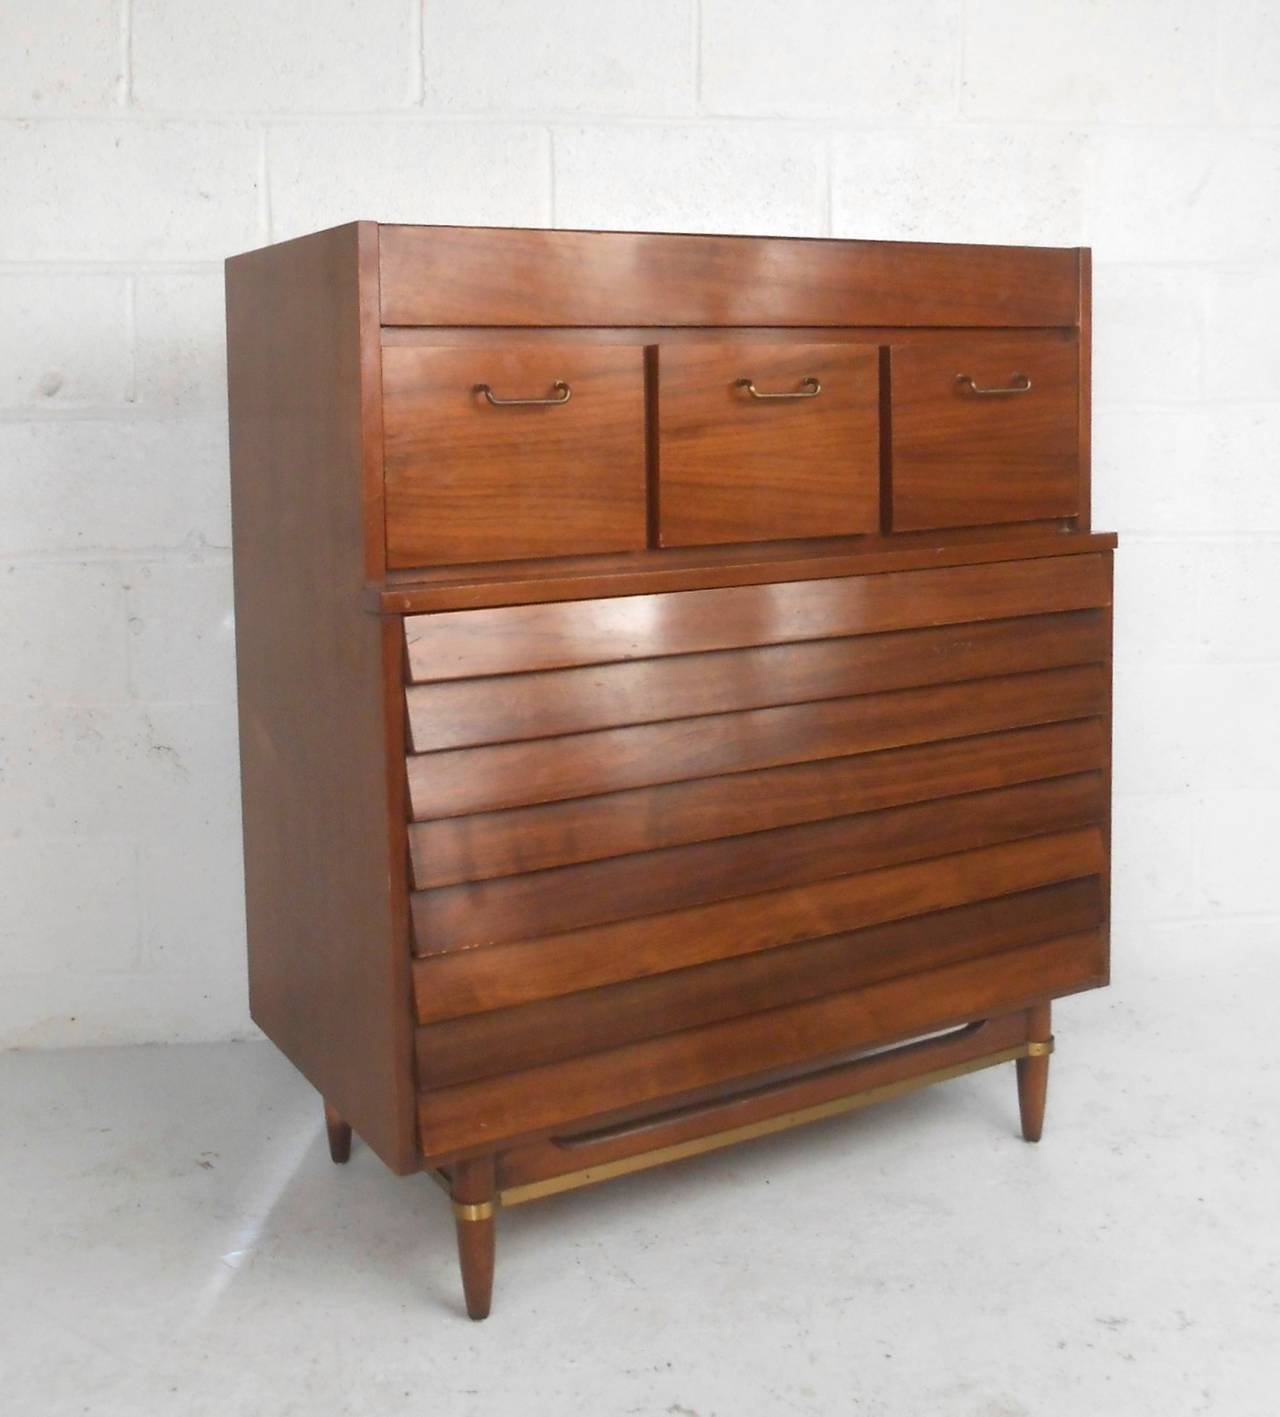 This beautiful louvered front dresser was designed by Merton Gershun for American of Martinsville and features the mid-century style and construction quality that keep these pieces in such high demand today. Unique brass trim on stretcher, as well